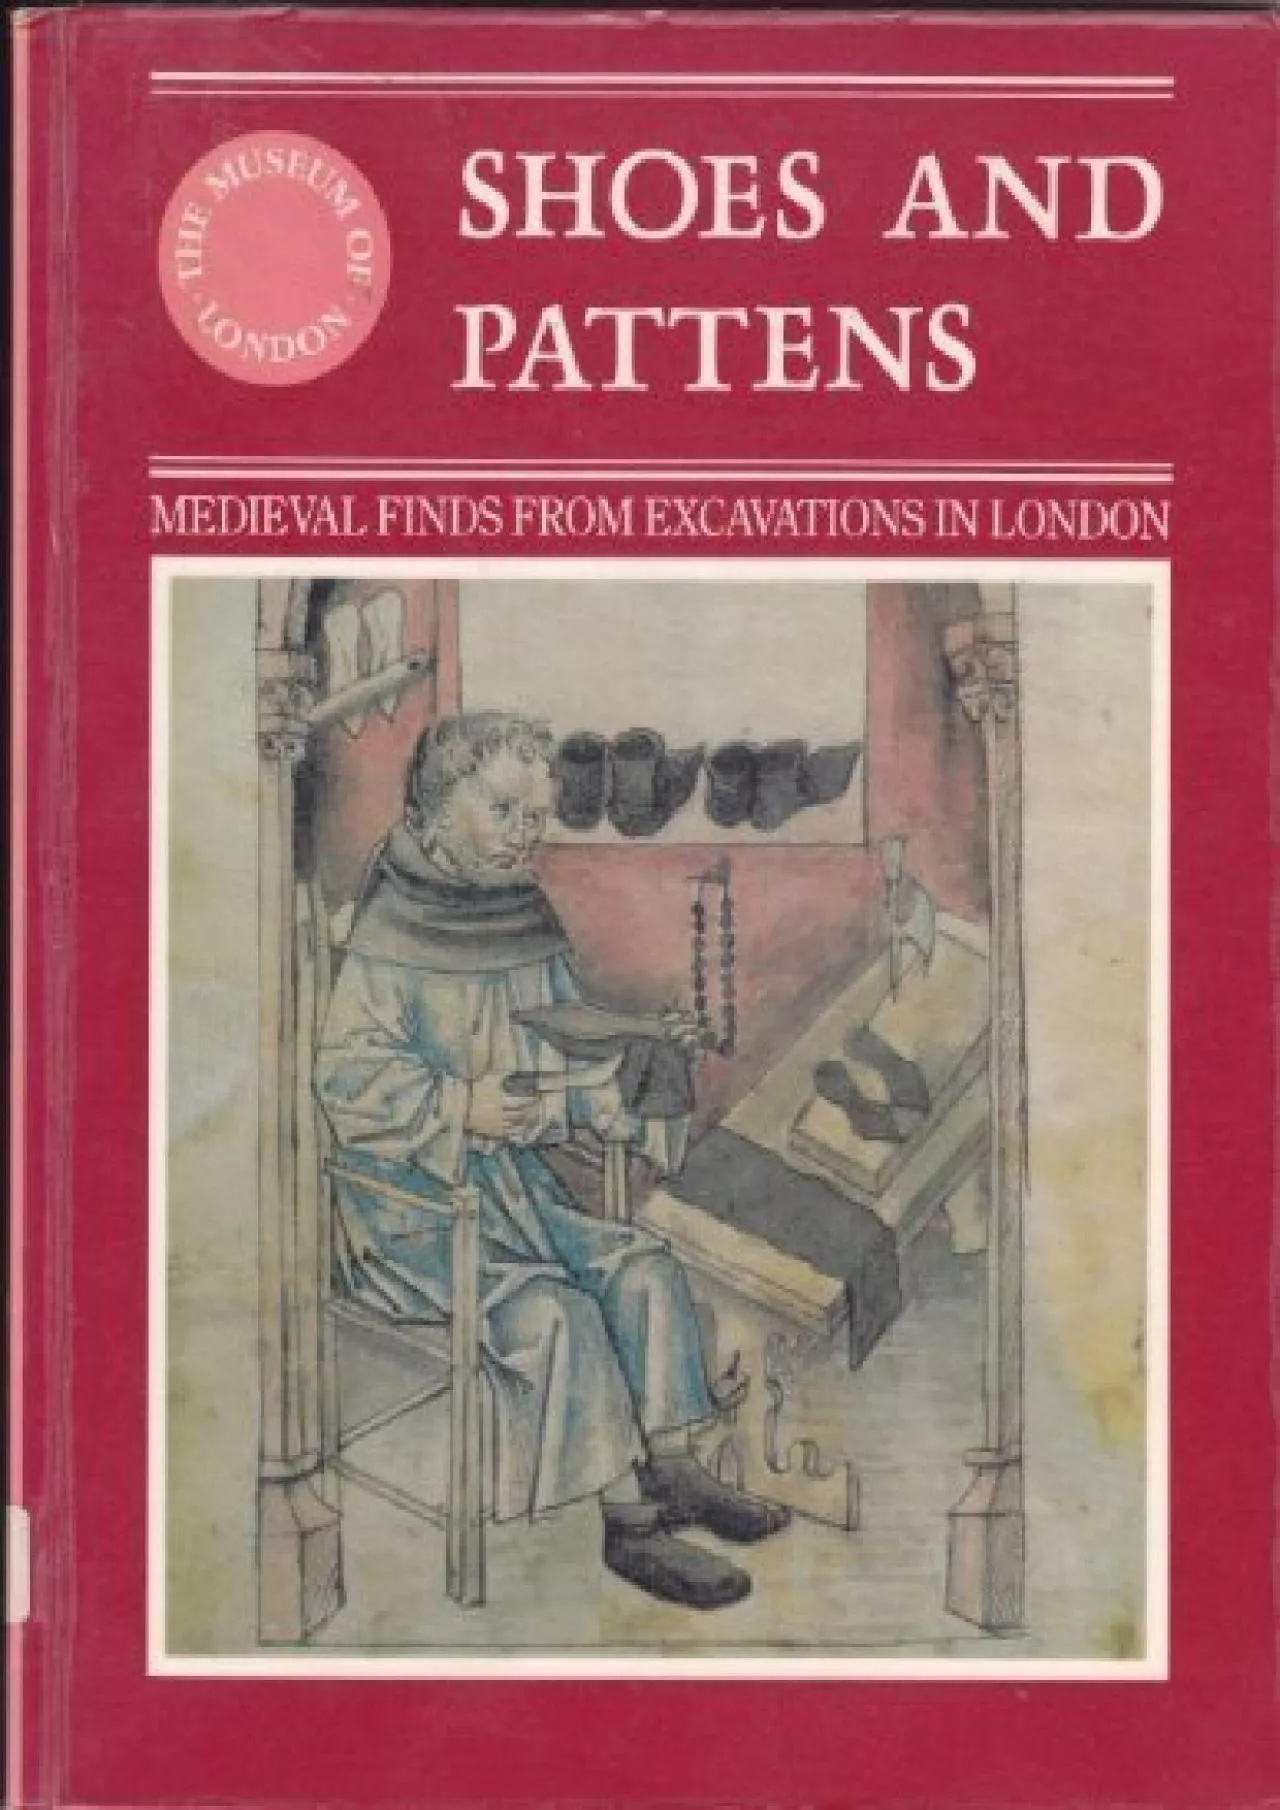 (BOOS)-Shoes and Patterns (Medieval finds from excavations in London) (English, French